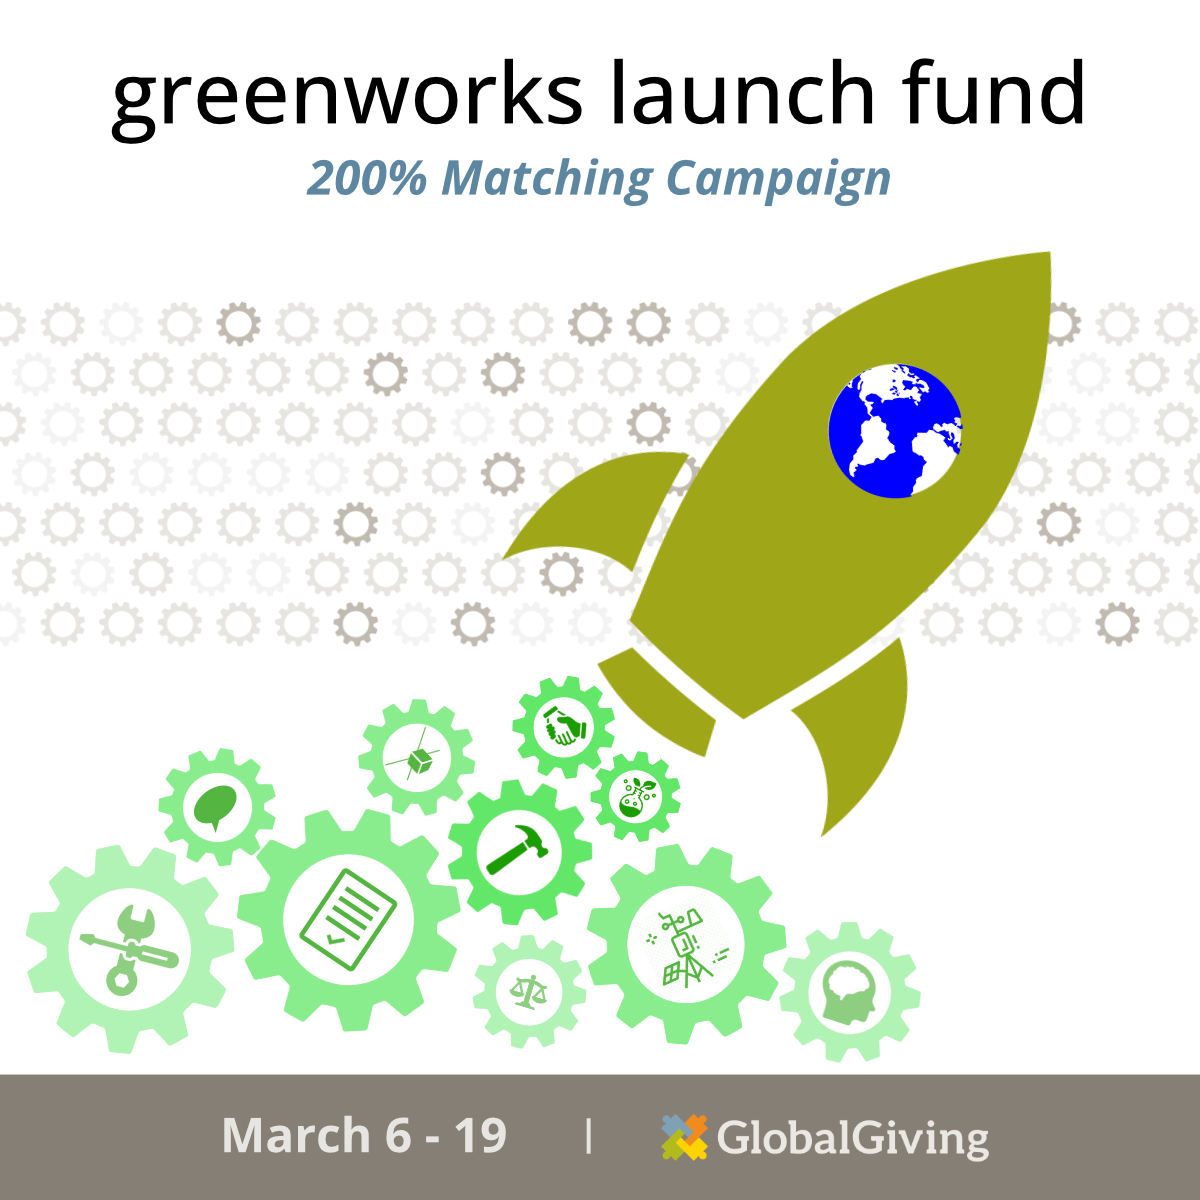 Greenworks Launch Fund, 200% Matching Campaign, March 6-19 through GlobalGiving (icon rocket with Earth launching to the left, with Greenworks gears emerging from the back as exhaust)